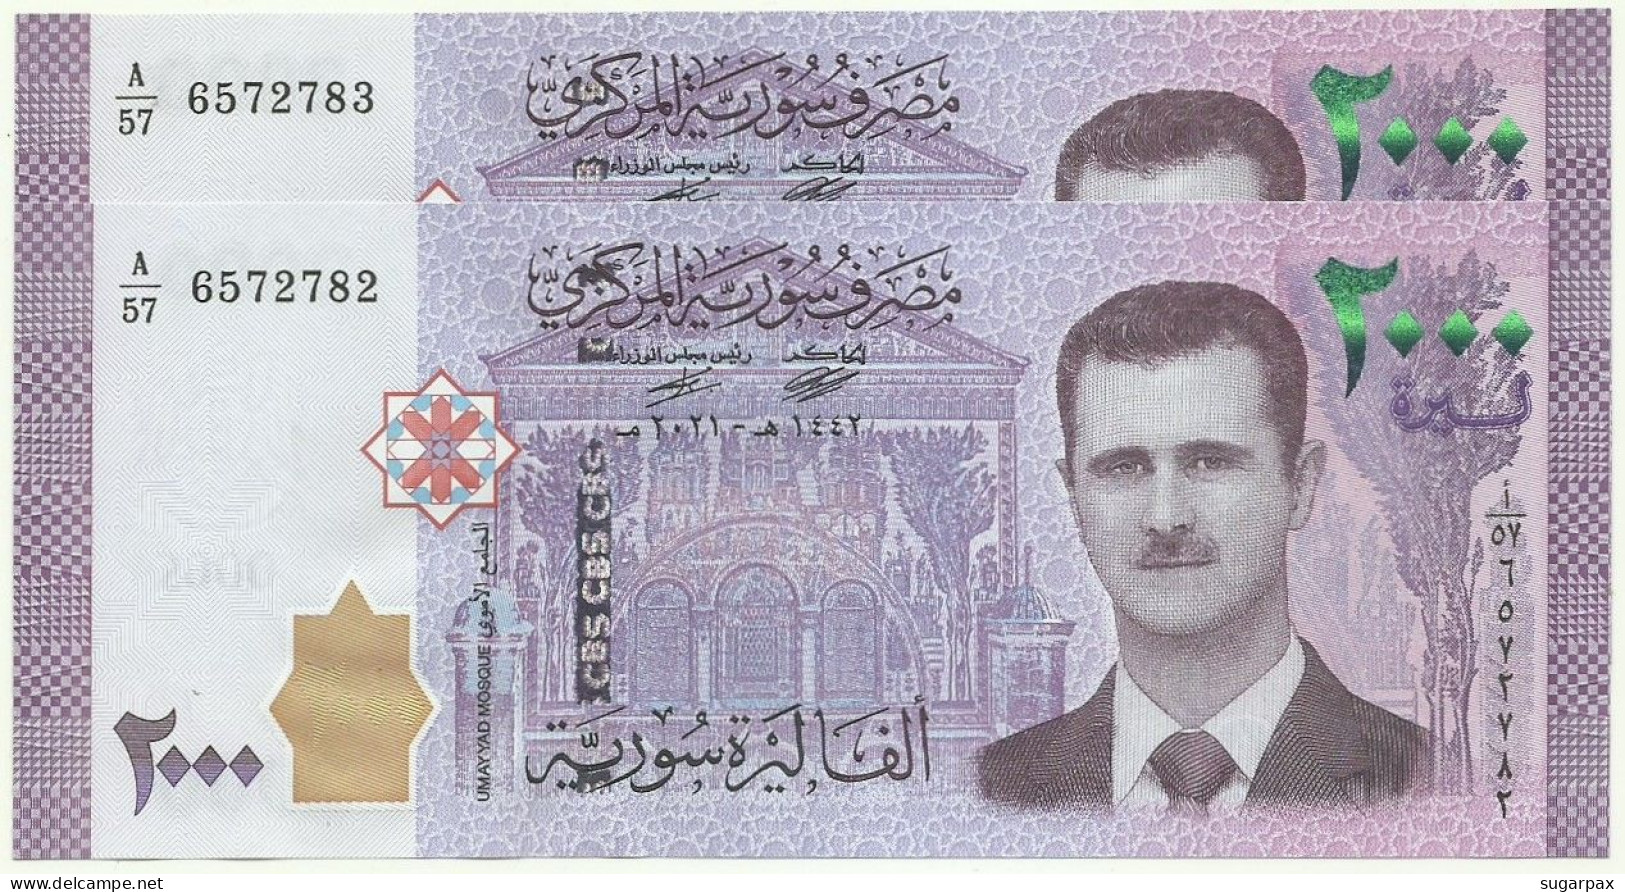 Syria - 2 X 2000 Syrian Pounds - 2021 / AH 1442 - Pick 117.NEW - Unc. - Serie A/57 - 2.000 - Syria